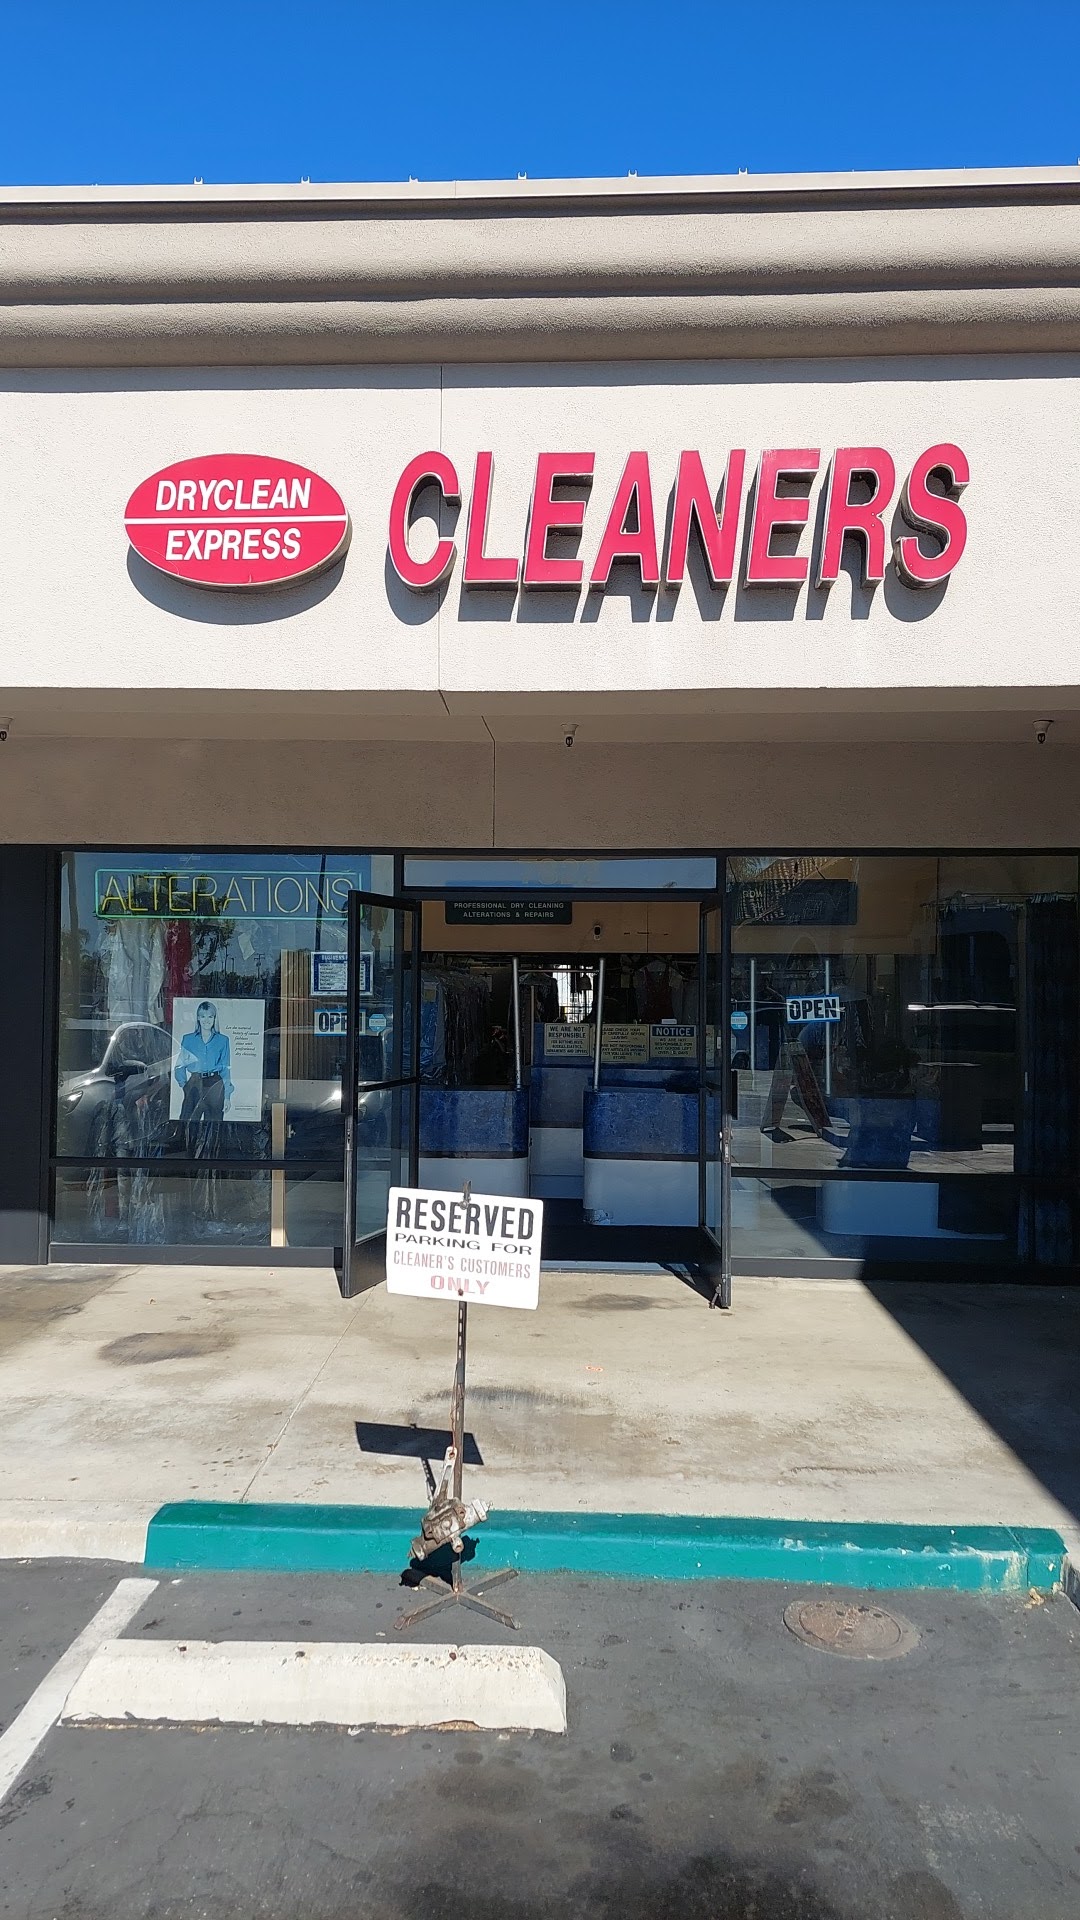 DRYCLEAN EXPRESS CLEANERS